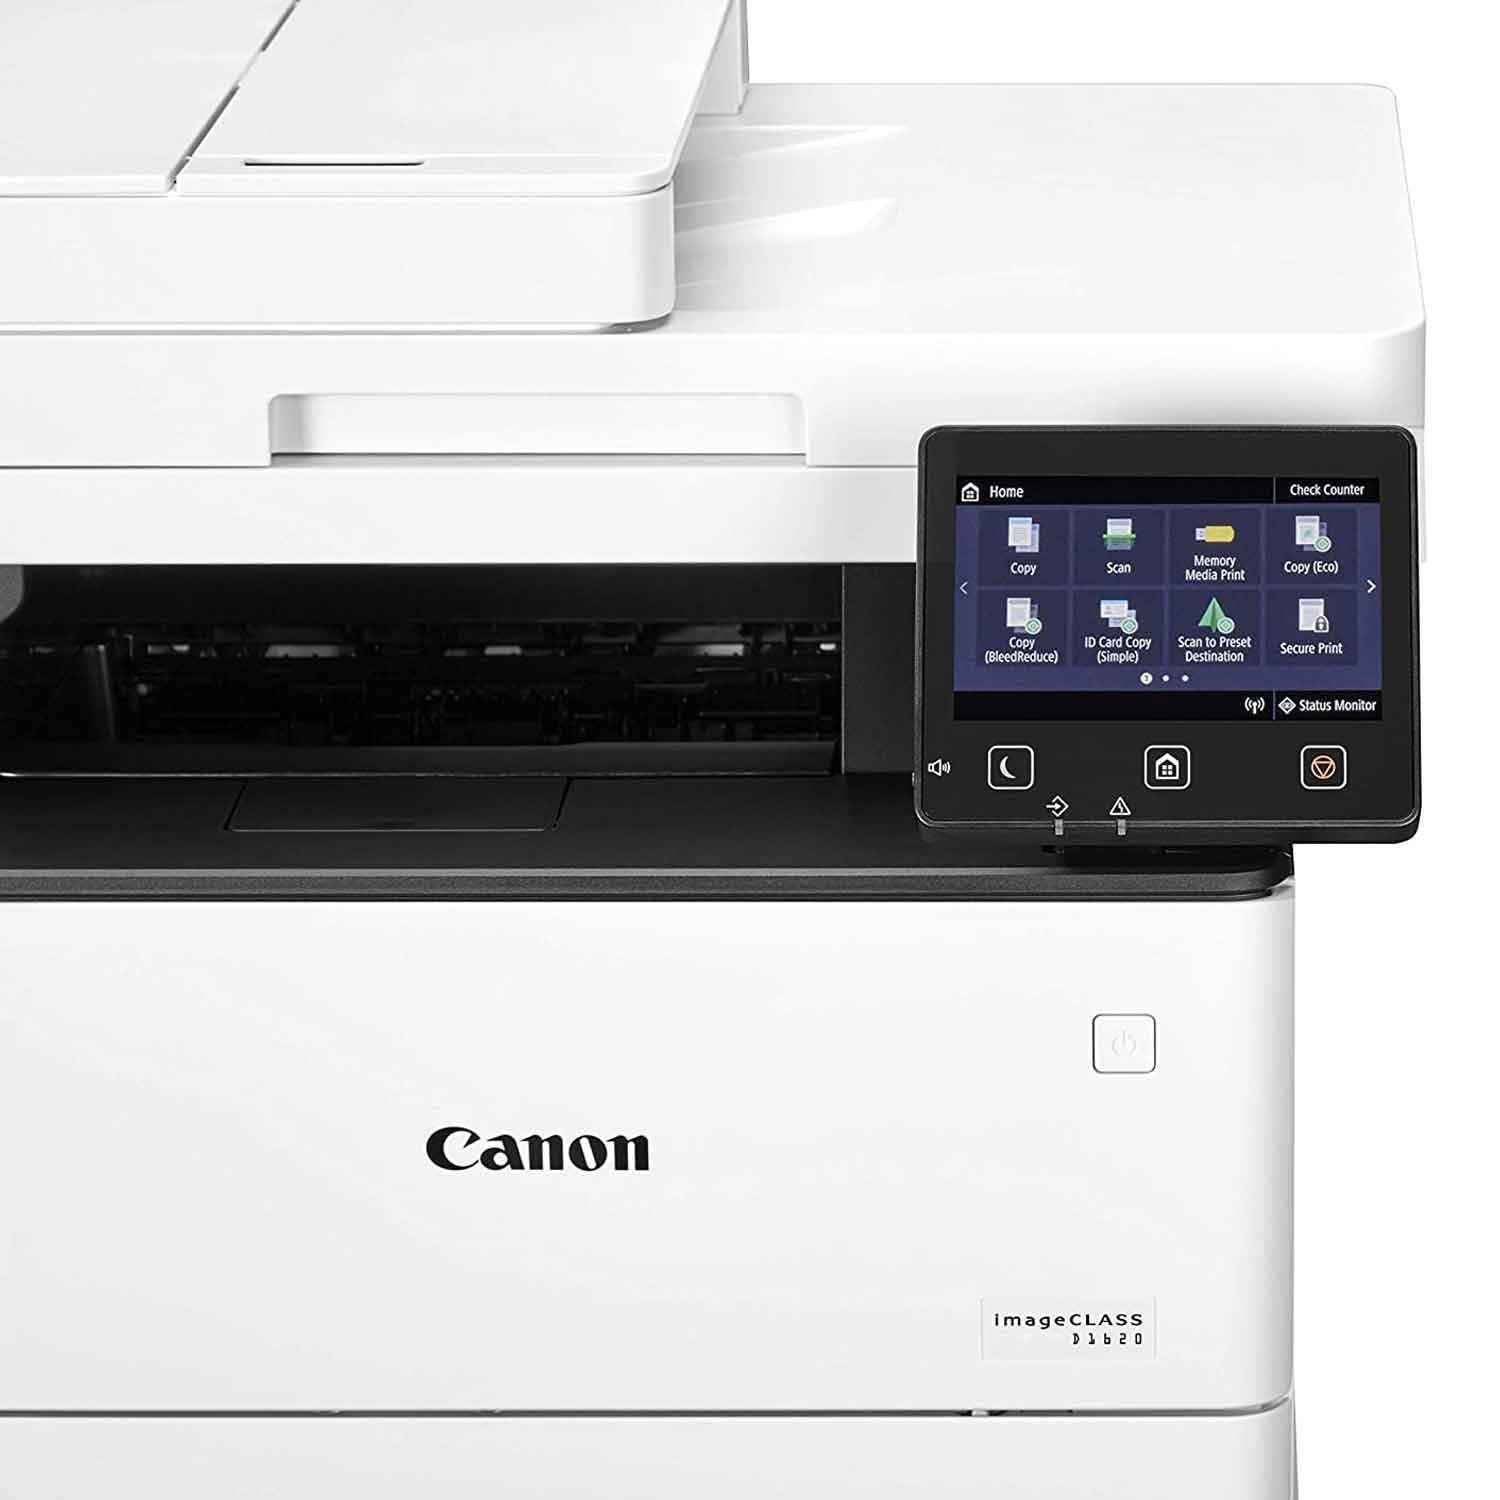 Canon imageCLASS D1620 (2223C024) Multifunction, Wireless Laser Printer with AirPrint, 45 Pages Per Minute and 3 Year Warranty, Amazon Dash Replenishment enabled, 17.8